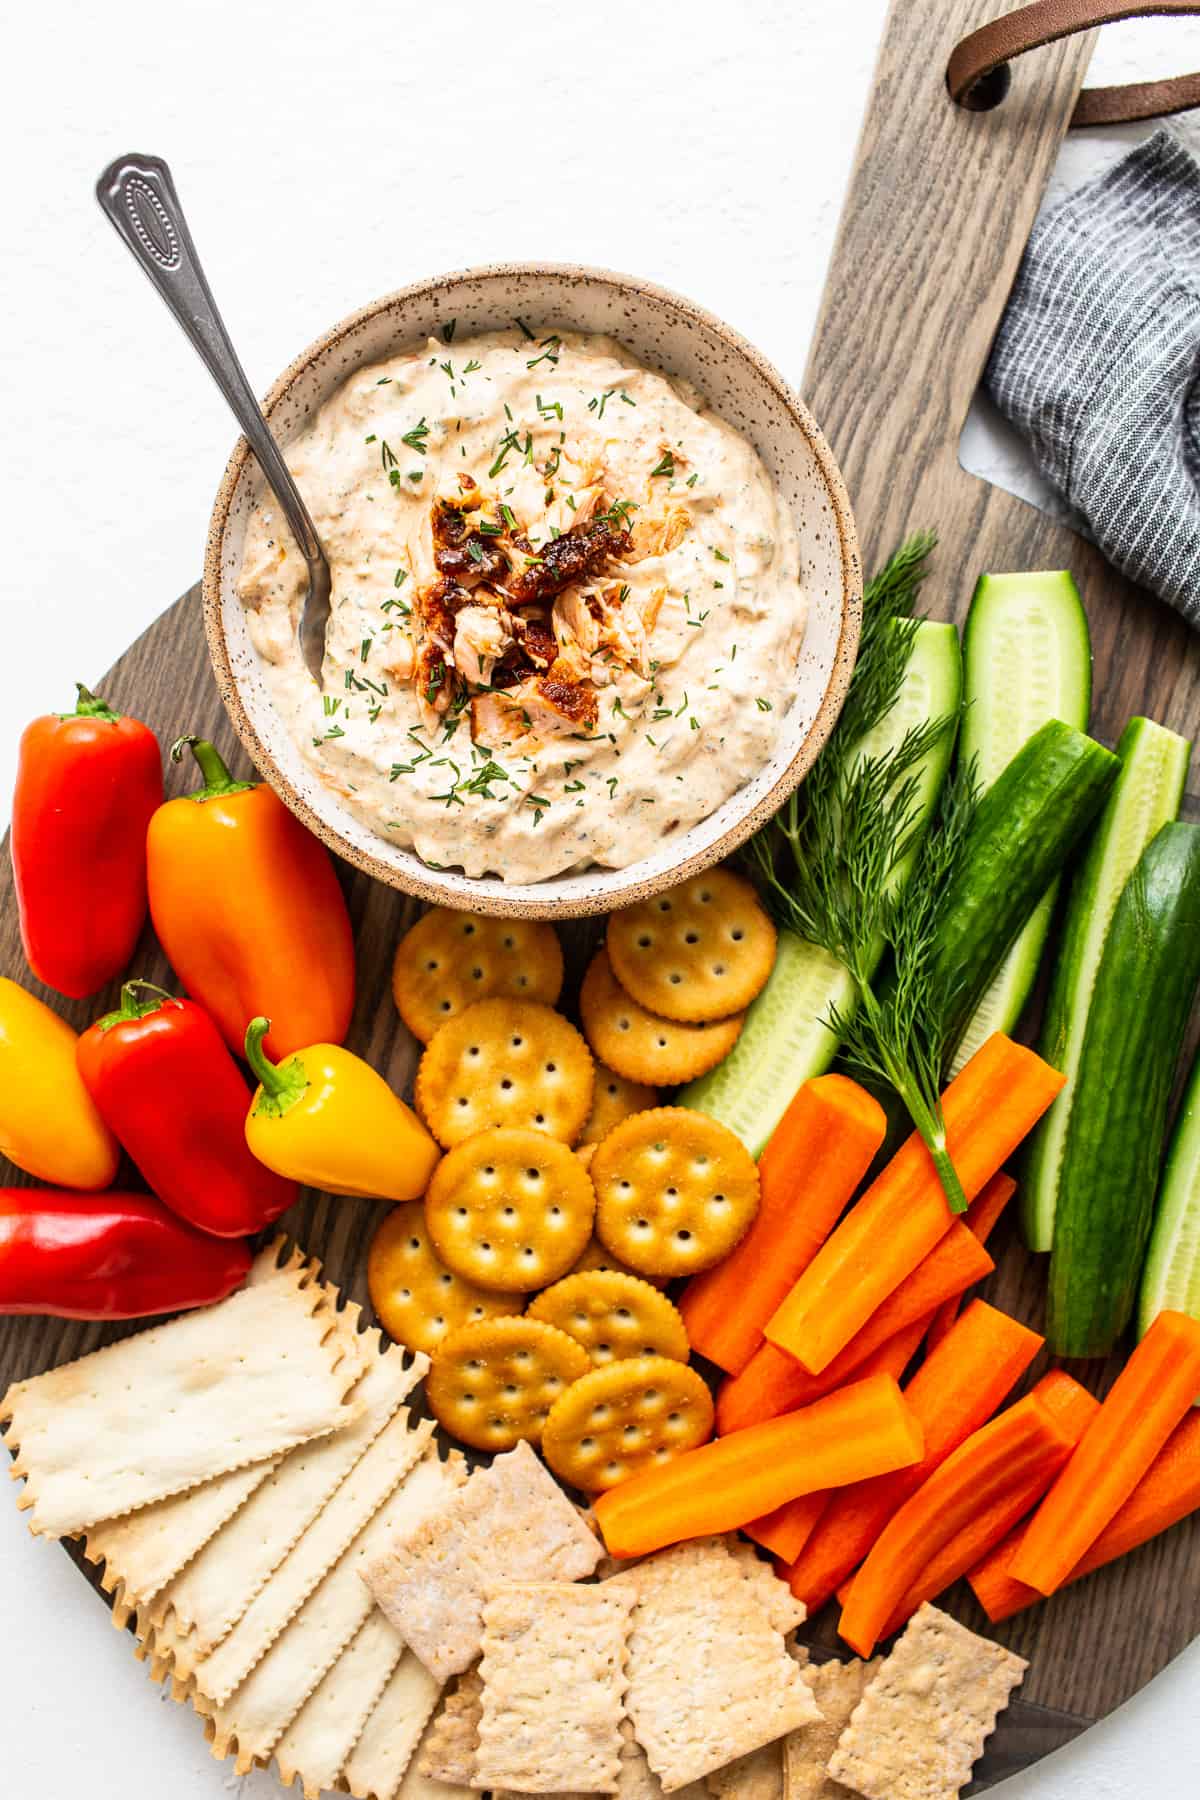 Smoked salmon dip in a bowl with crackers and veggies.